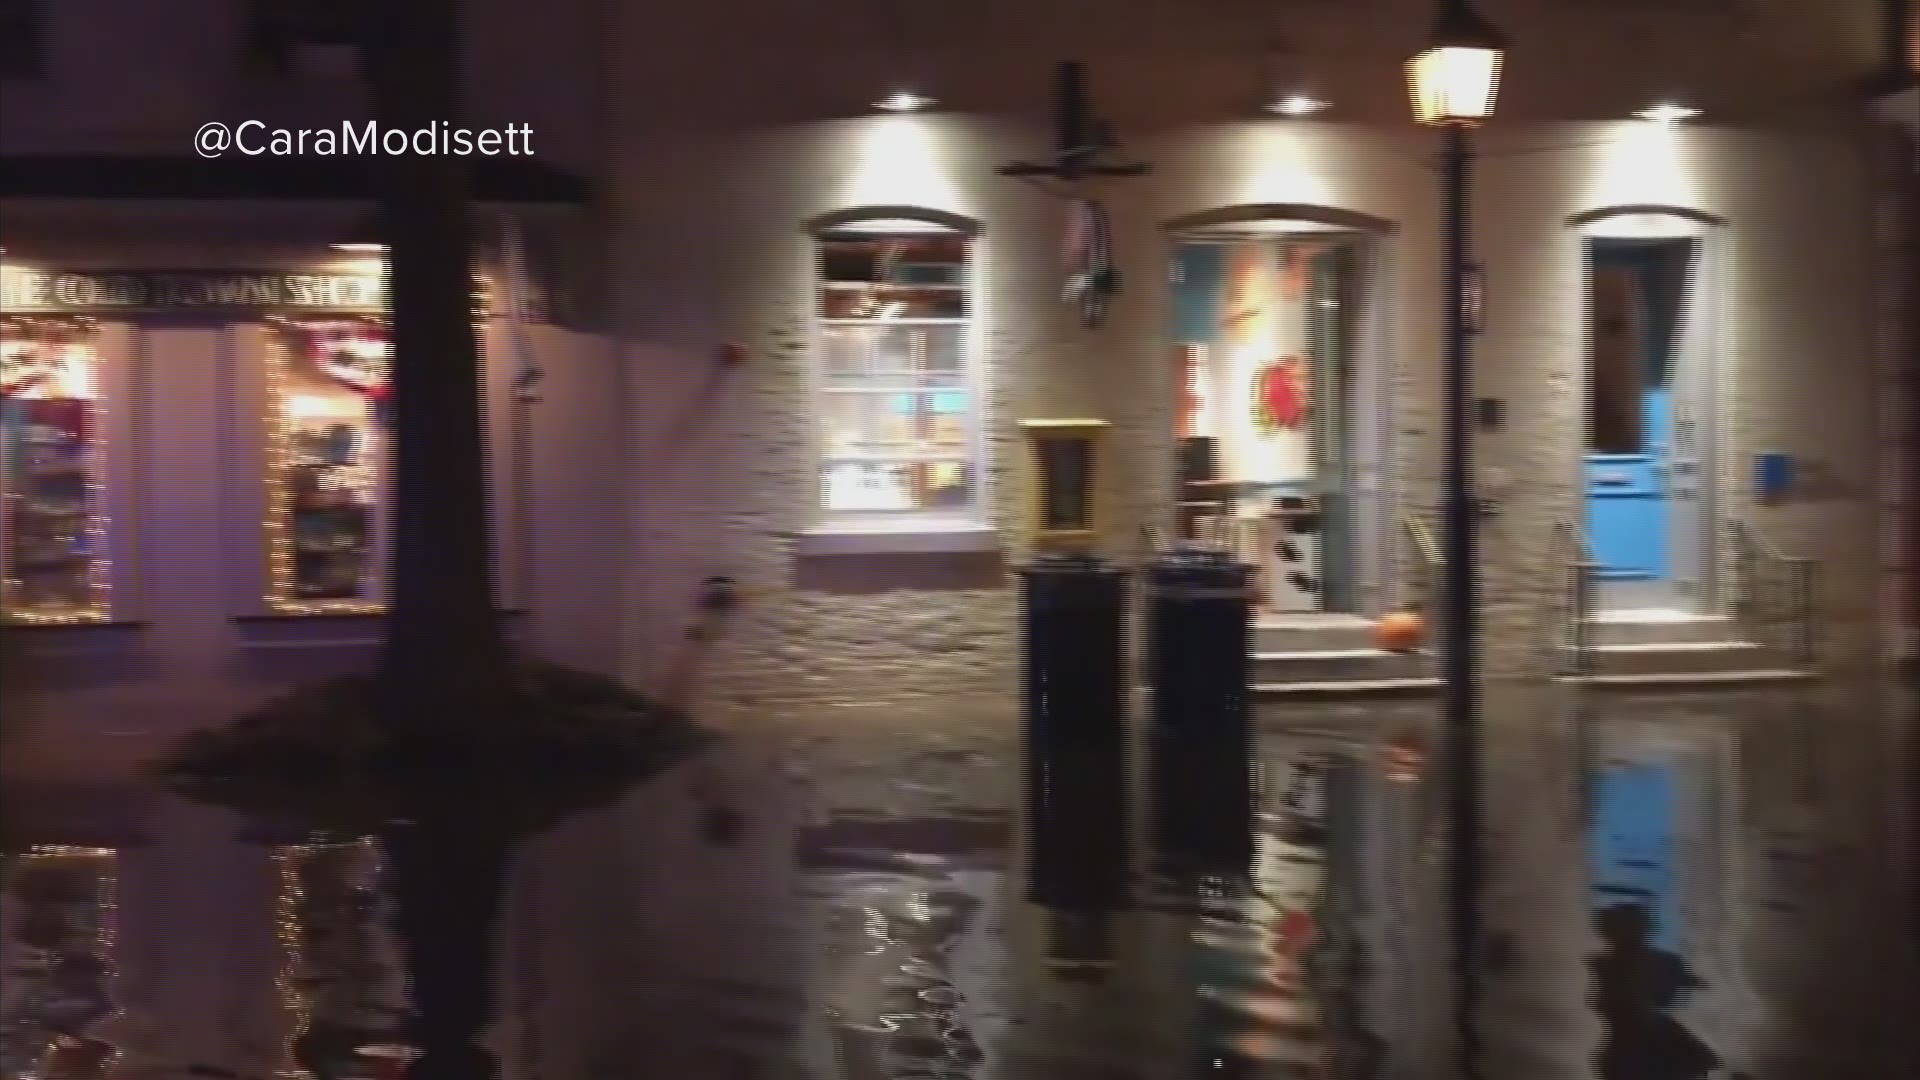 While flooding isn't unusual in Old Town, residents say they were surprised there was no rainfall.